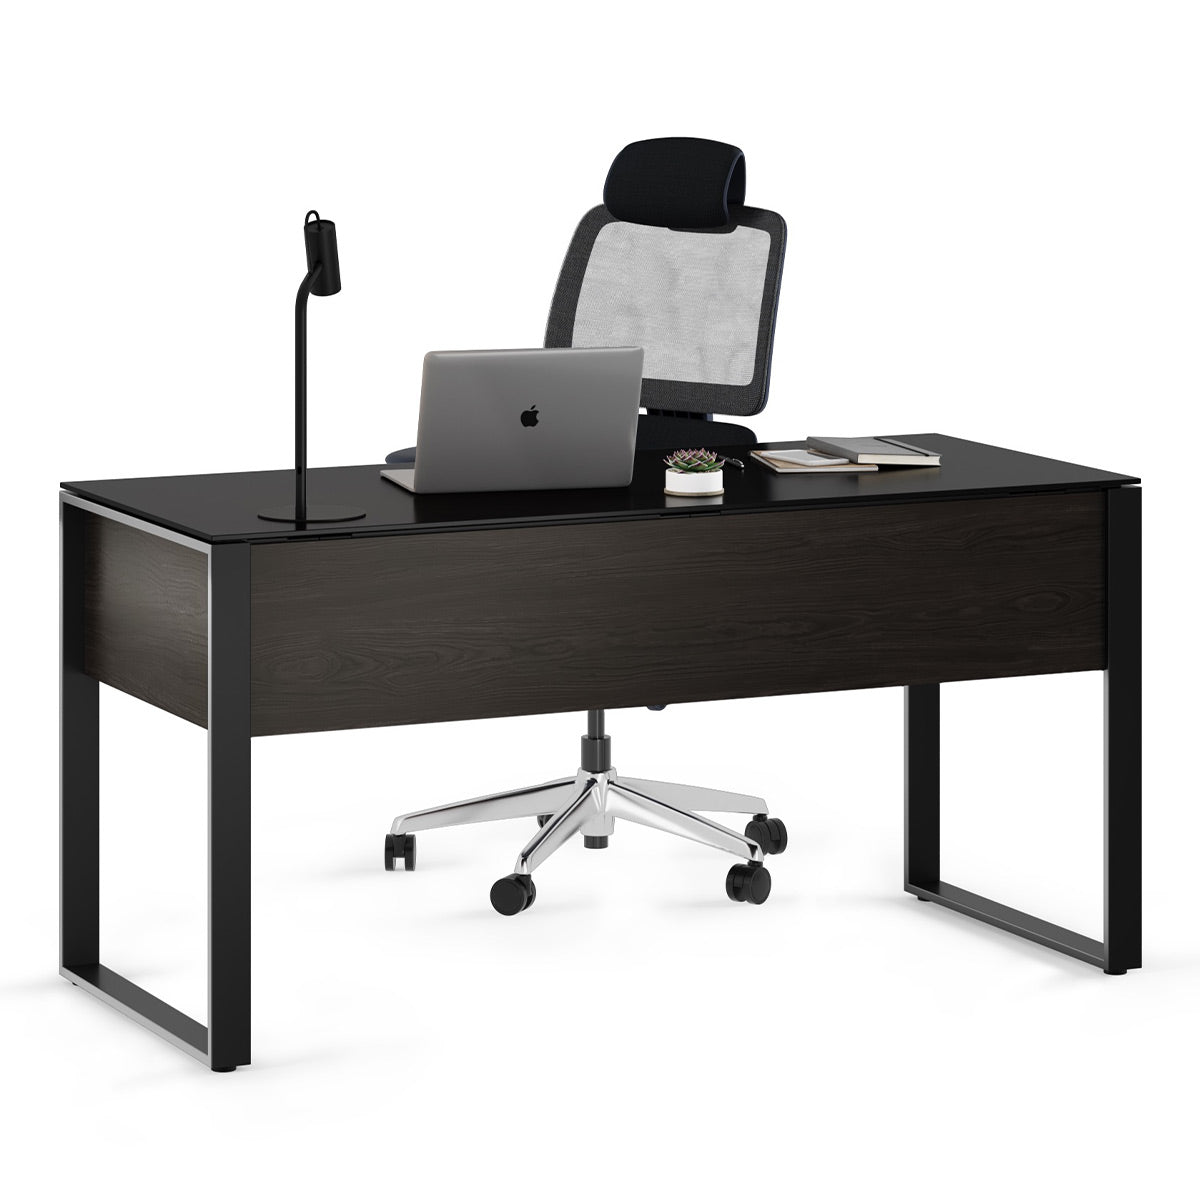 BDI Linea 6221 Office Desk - Charcoal Stained Ash